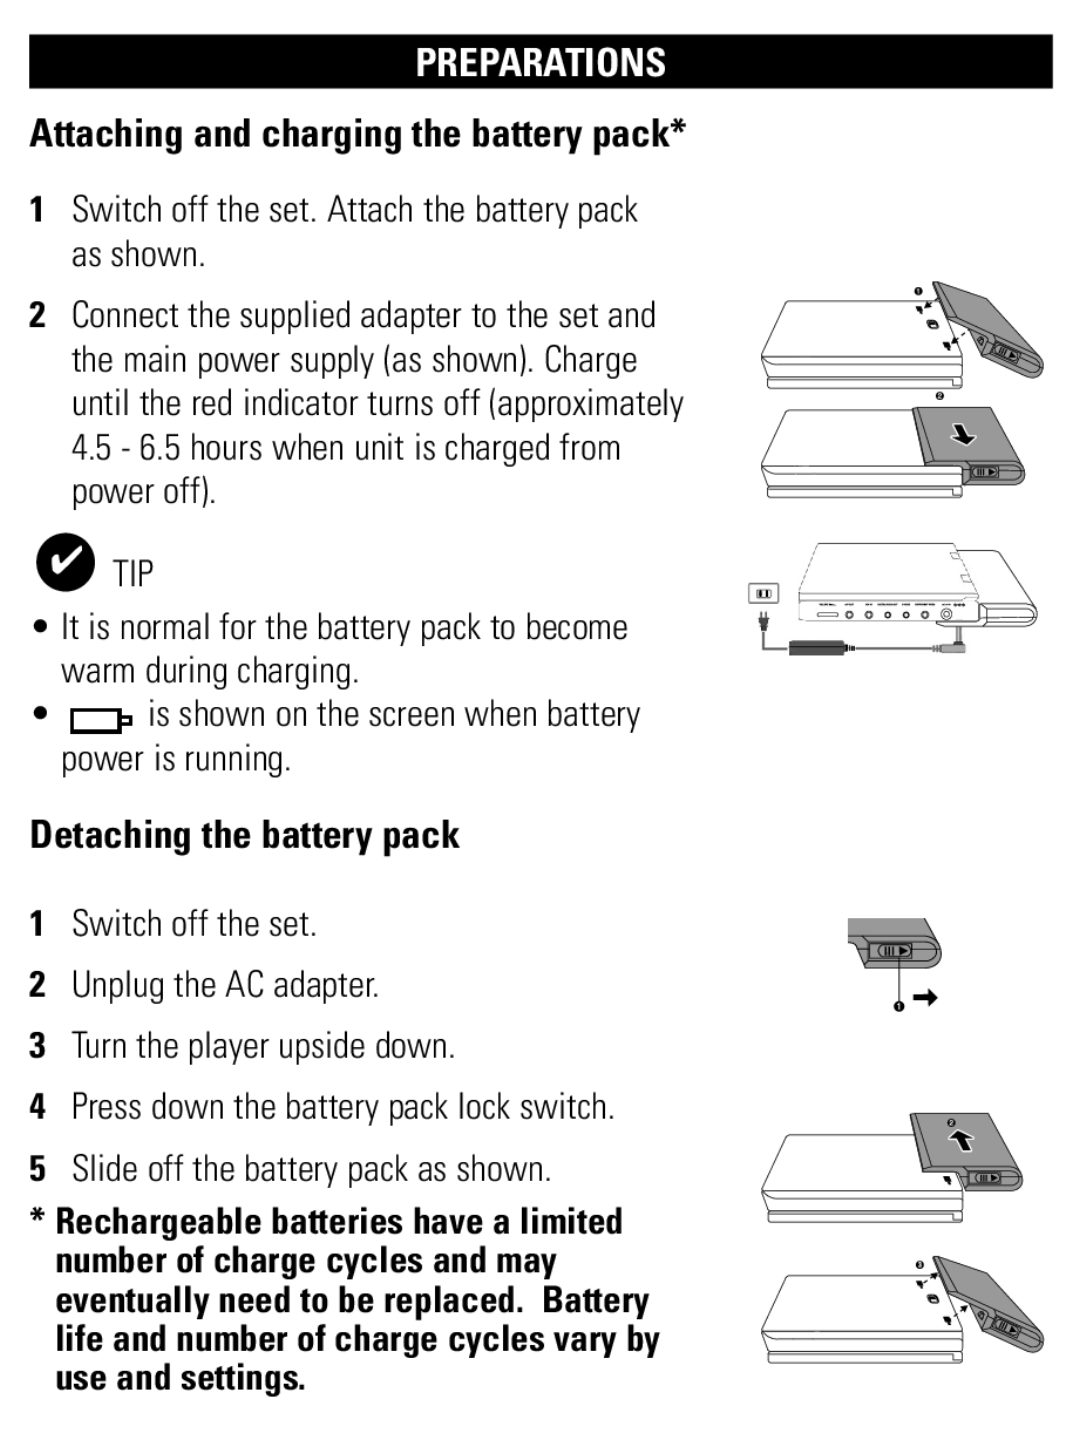 Philips PET1002 user manual Attaching and charging the battery pack, Detaching the battery pack, Preparations 